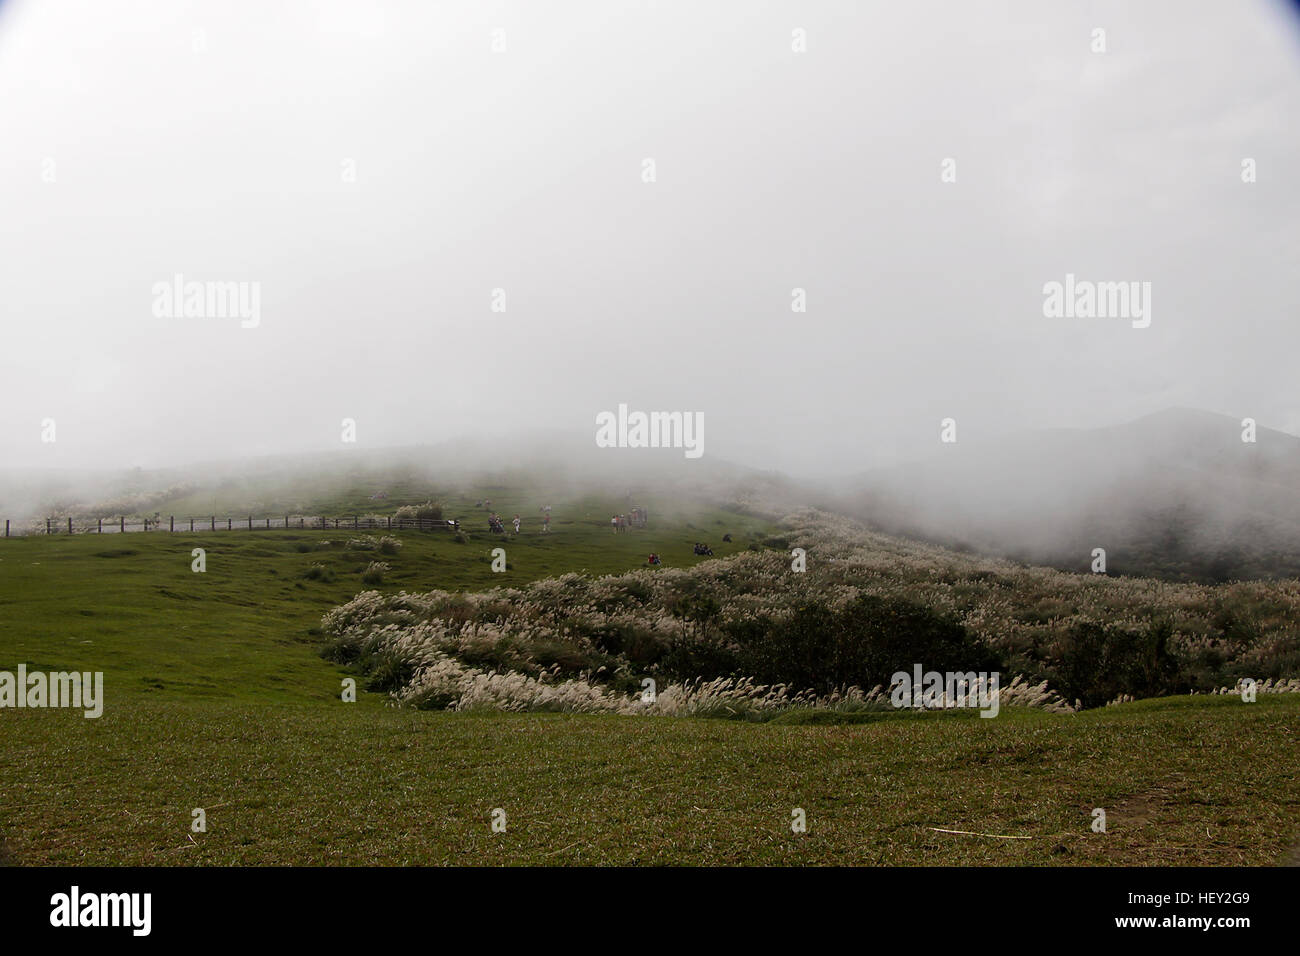 Long walking path leading all the way up the mountain obscured by heavy mist. Stock Photo